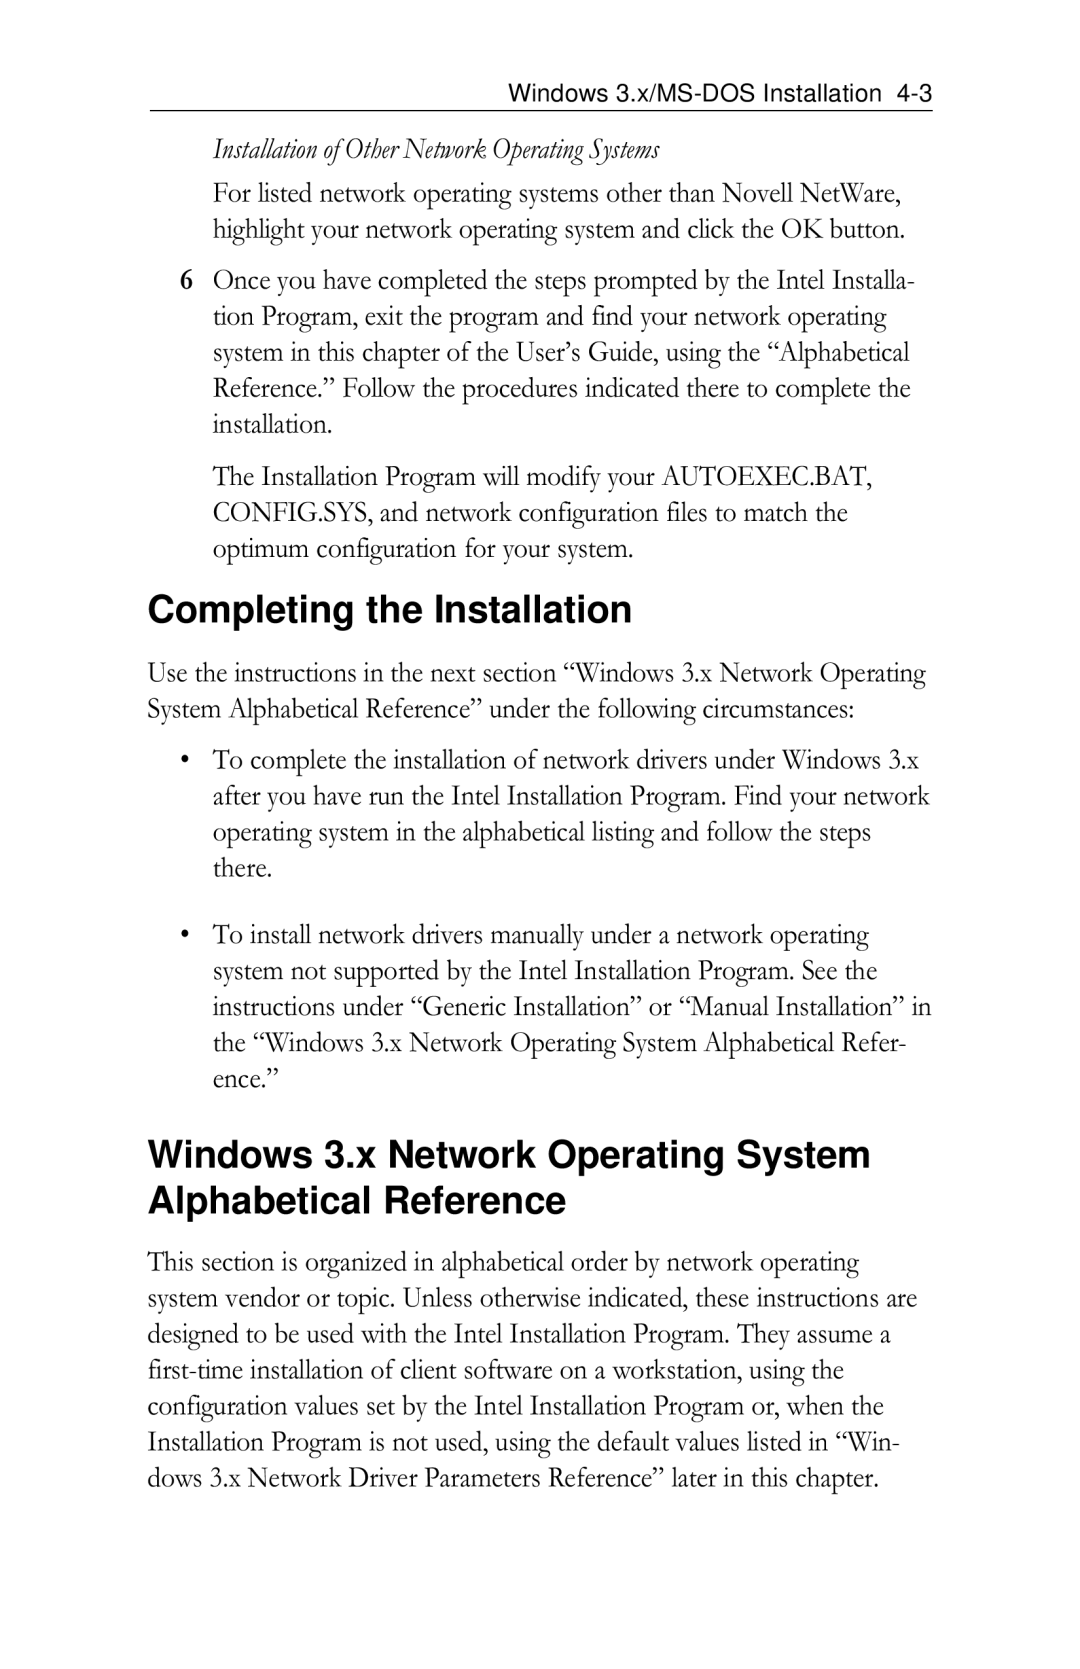 Intel PRO/100 appendix Completing the Installation, Windows 3.x Network Operating System Alphabetical Reference 